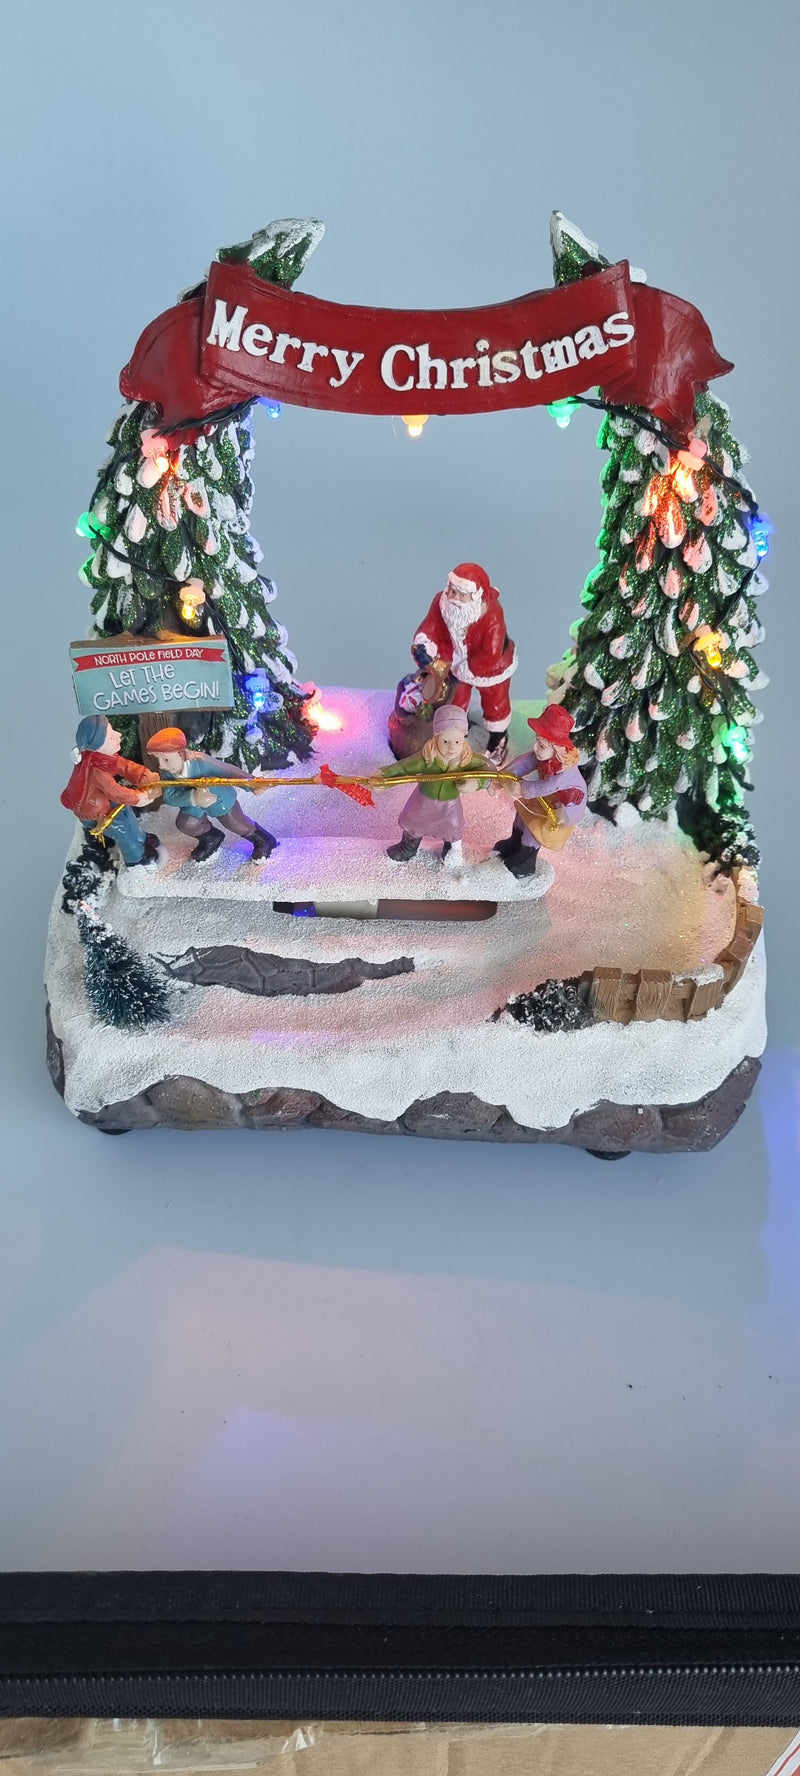 Animated santa playing with children toy